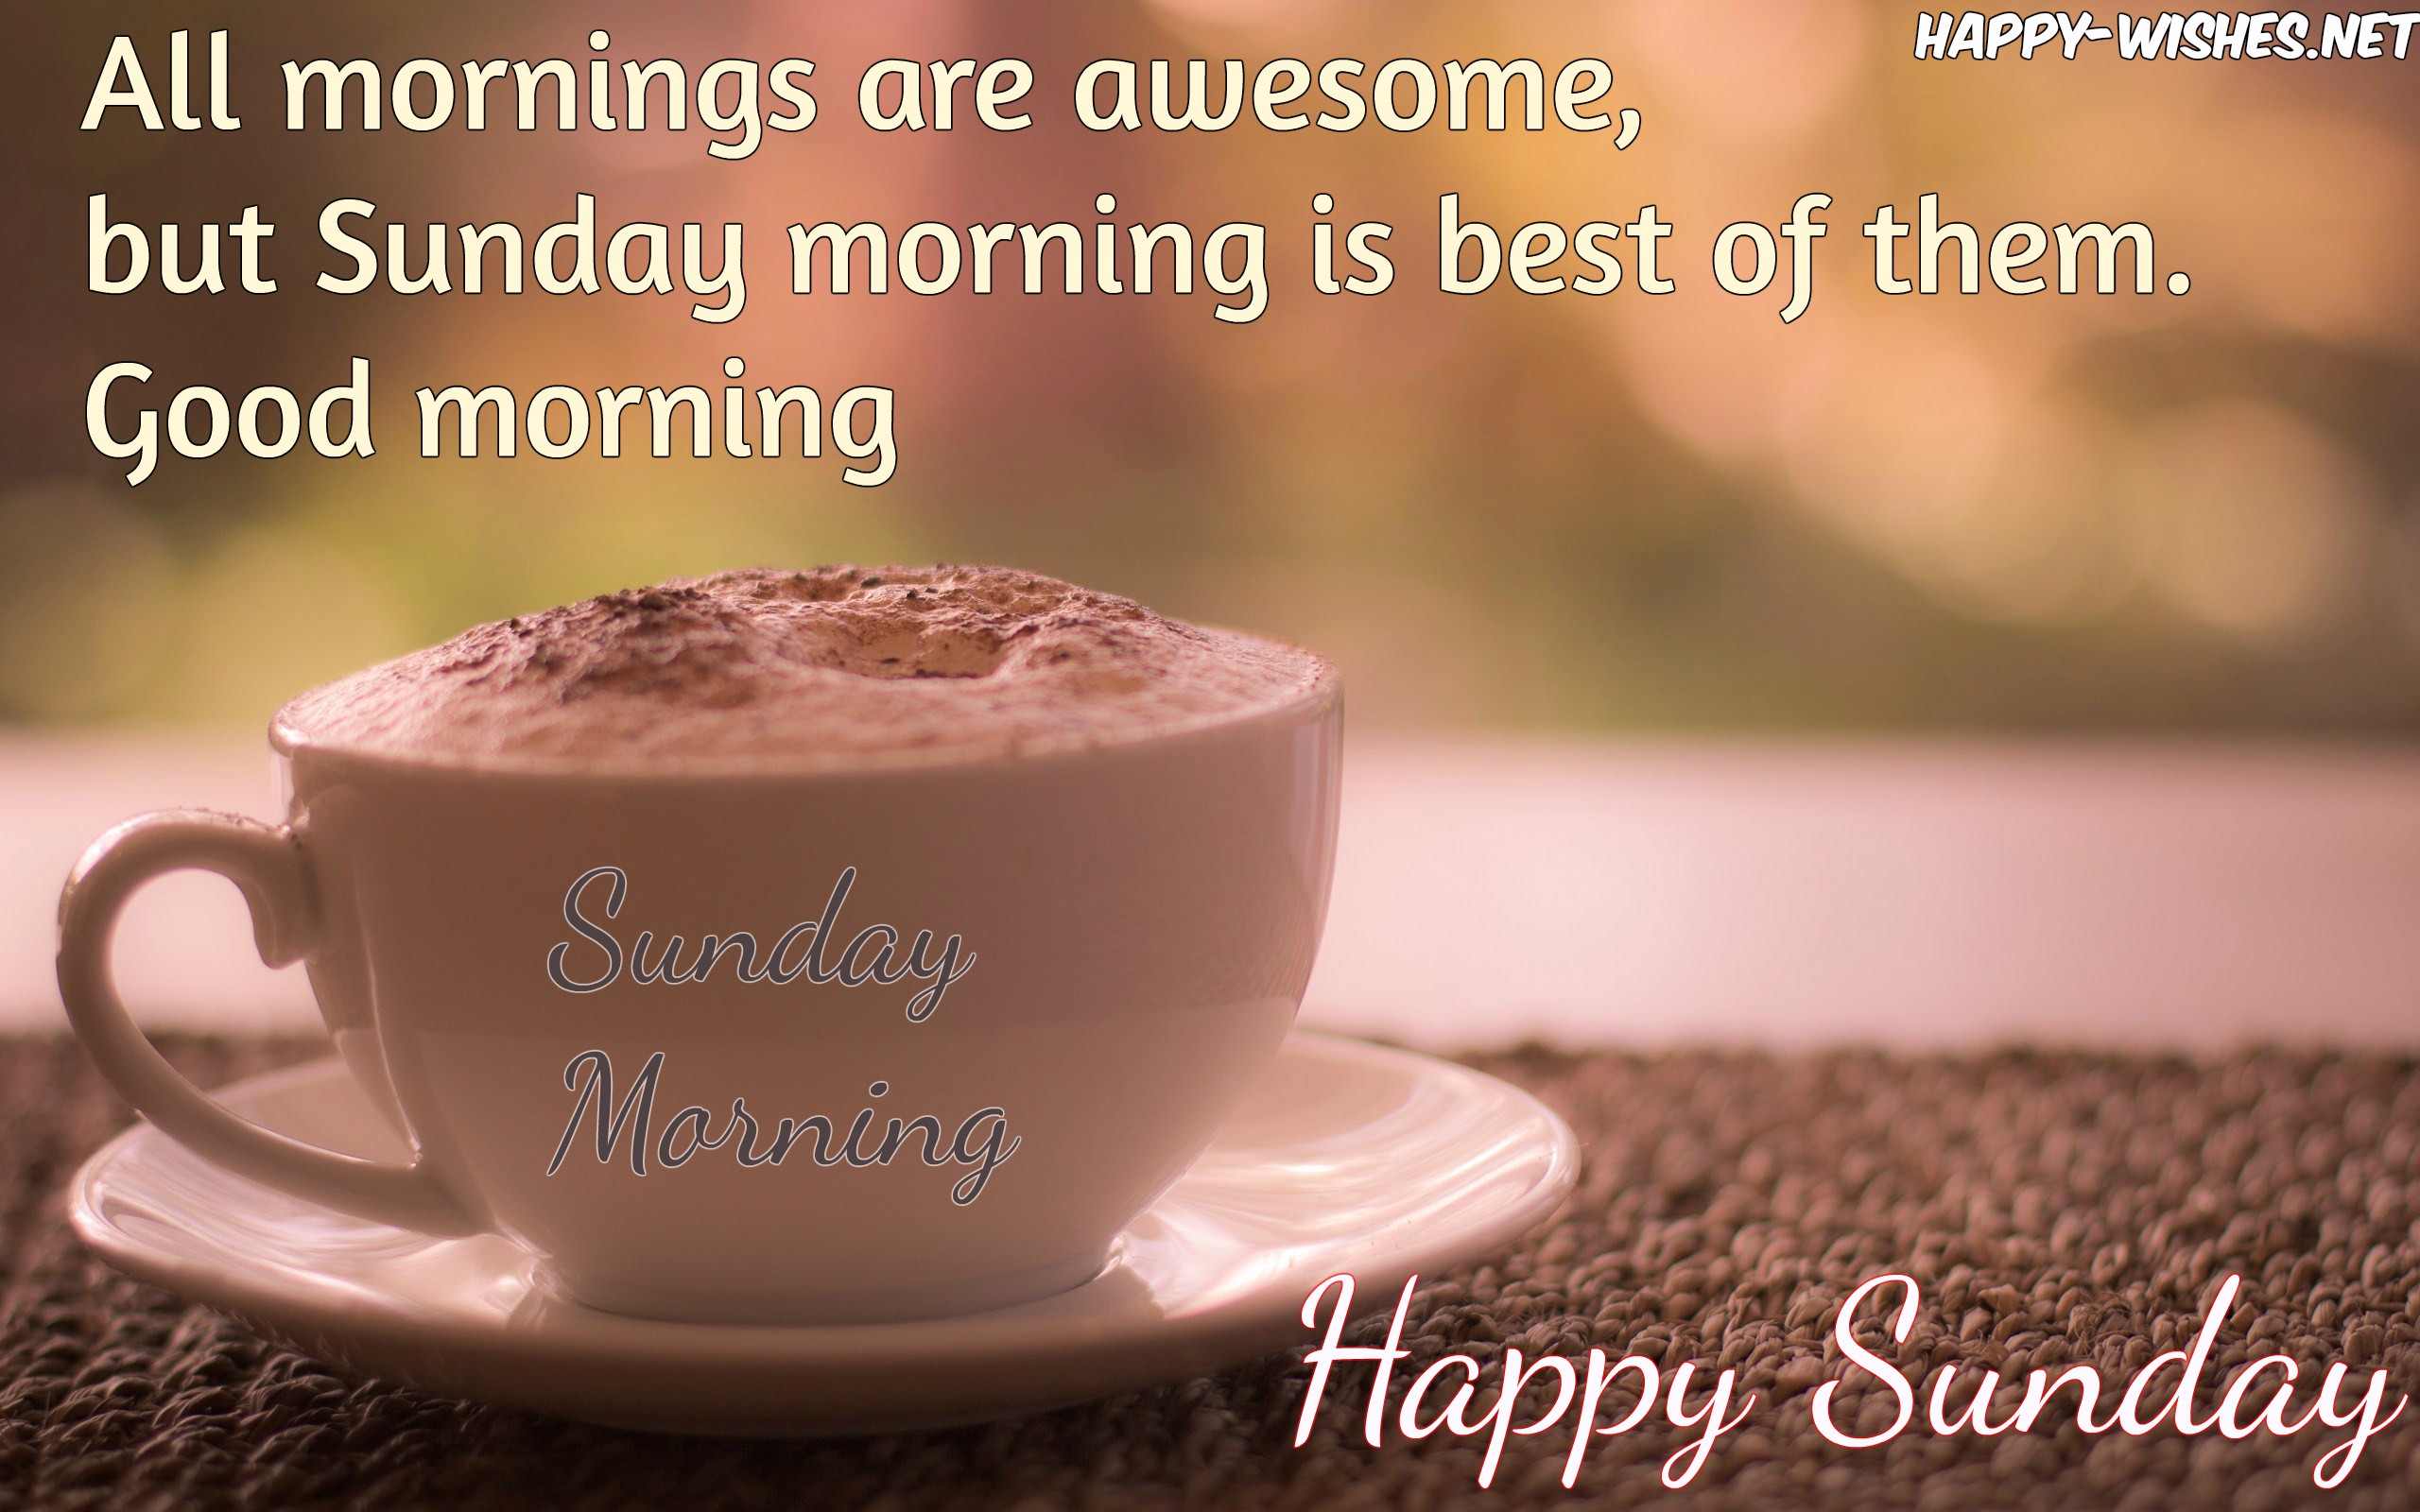 Good Morning Wishes On Sunday Quotes - Quote Good Morning Sunday - HD Wallpaper 